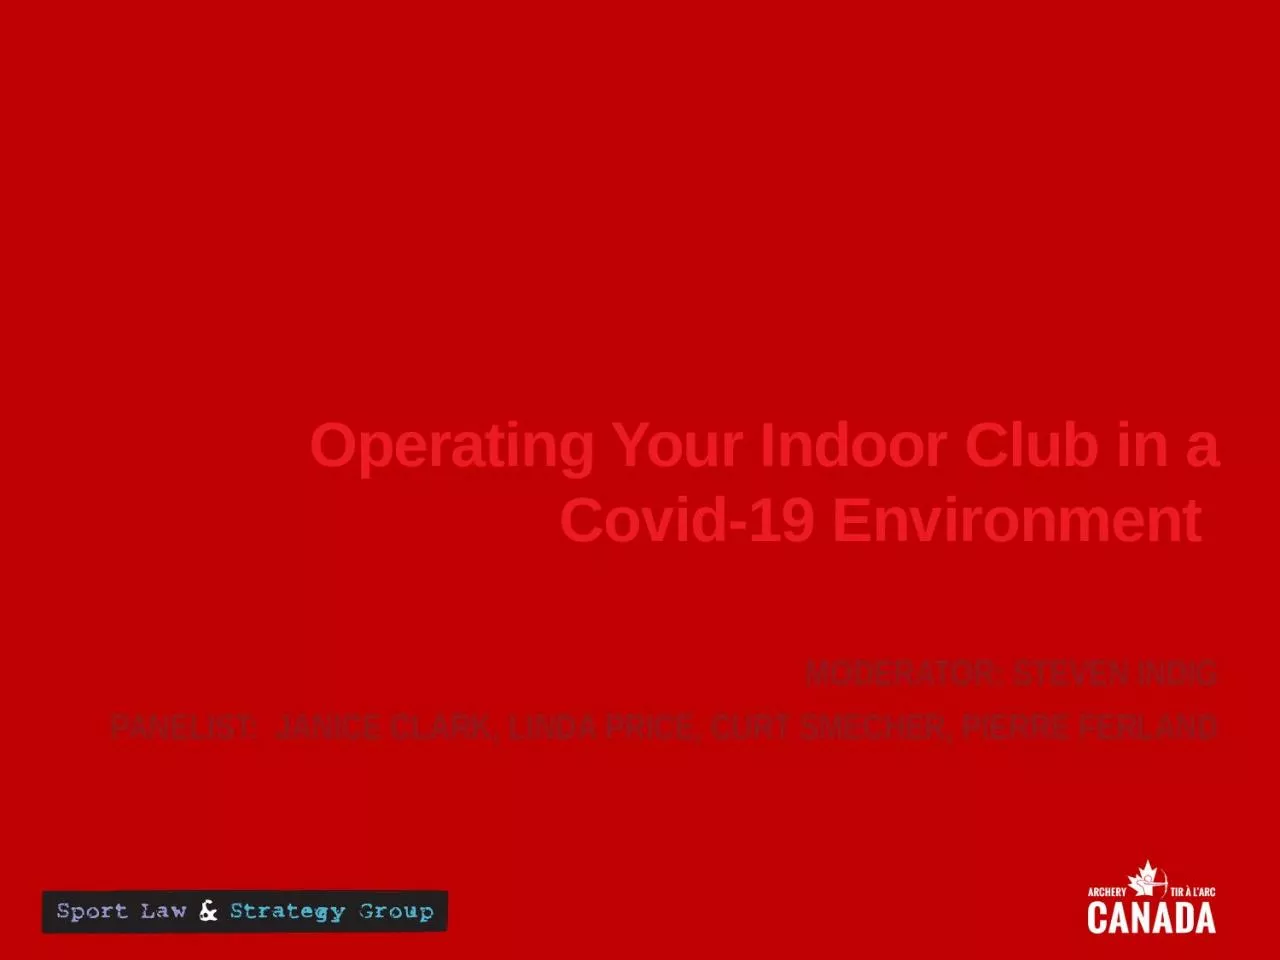 Operating Your Indoor Club in a Covid-19 Environment